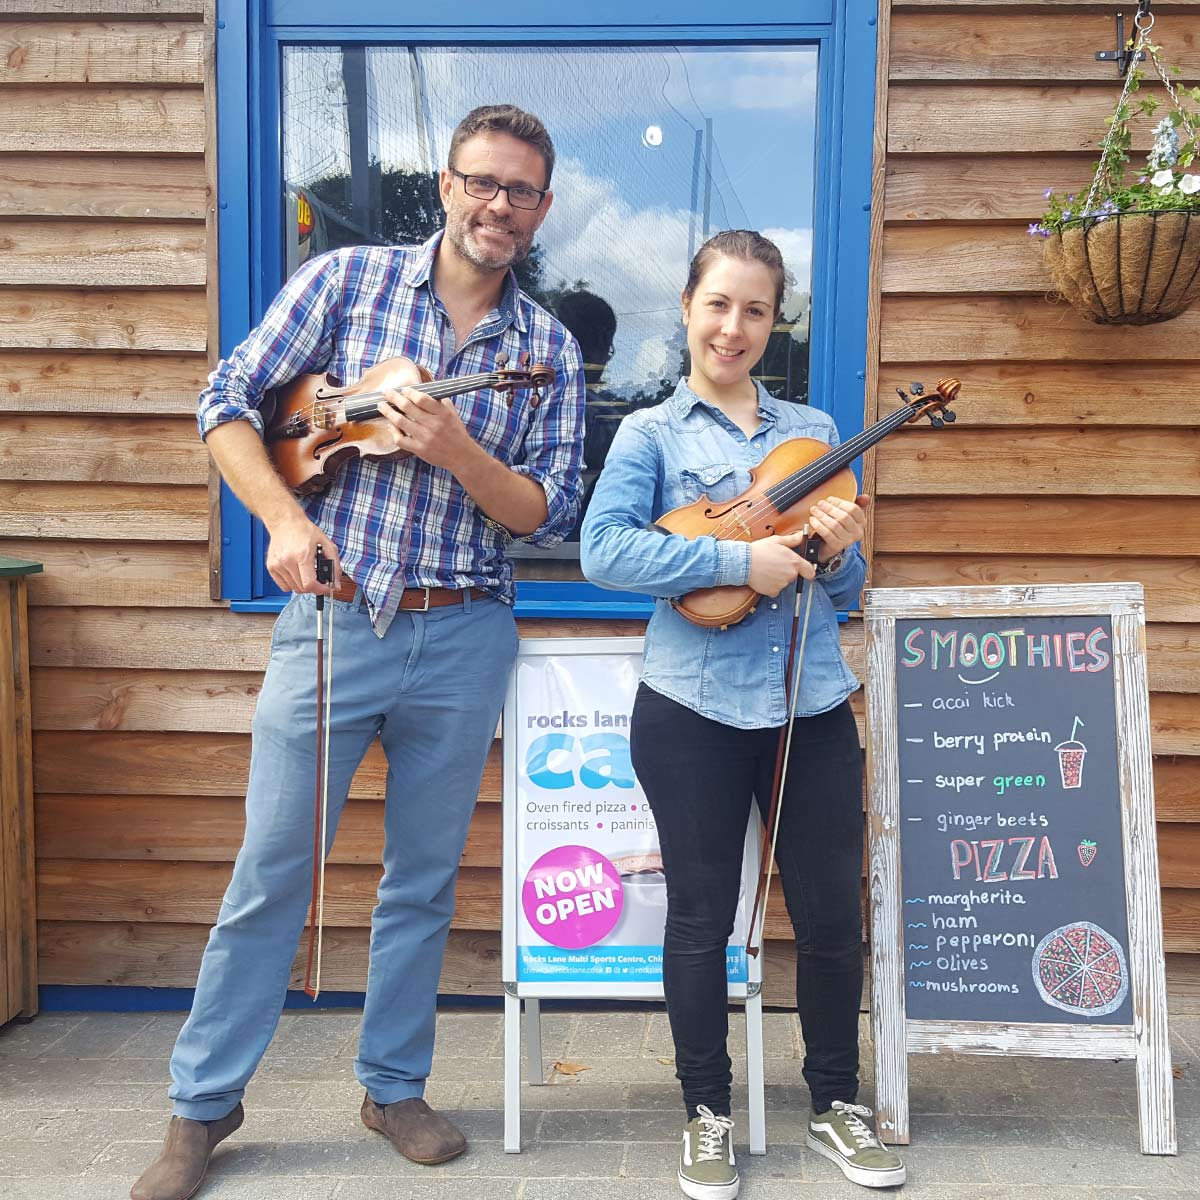 Group #ViolinLessons have started @rockslaneW4 Multi Sports Centre 60 #Chiswick Common Road #W4 1RZ - Call  Toby Walker about private lessons 07804132386 Visit bridgesuzukimusic.com for details - @ChiswickSchool @GandLSport @GodolphinRowing @WLFSPTA @RPPreSchool @StPaulsSchool